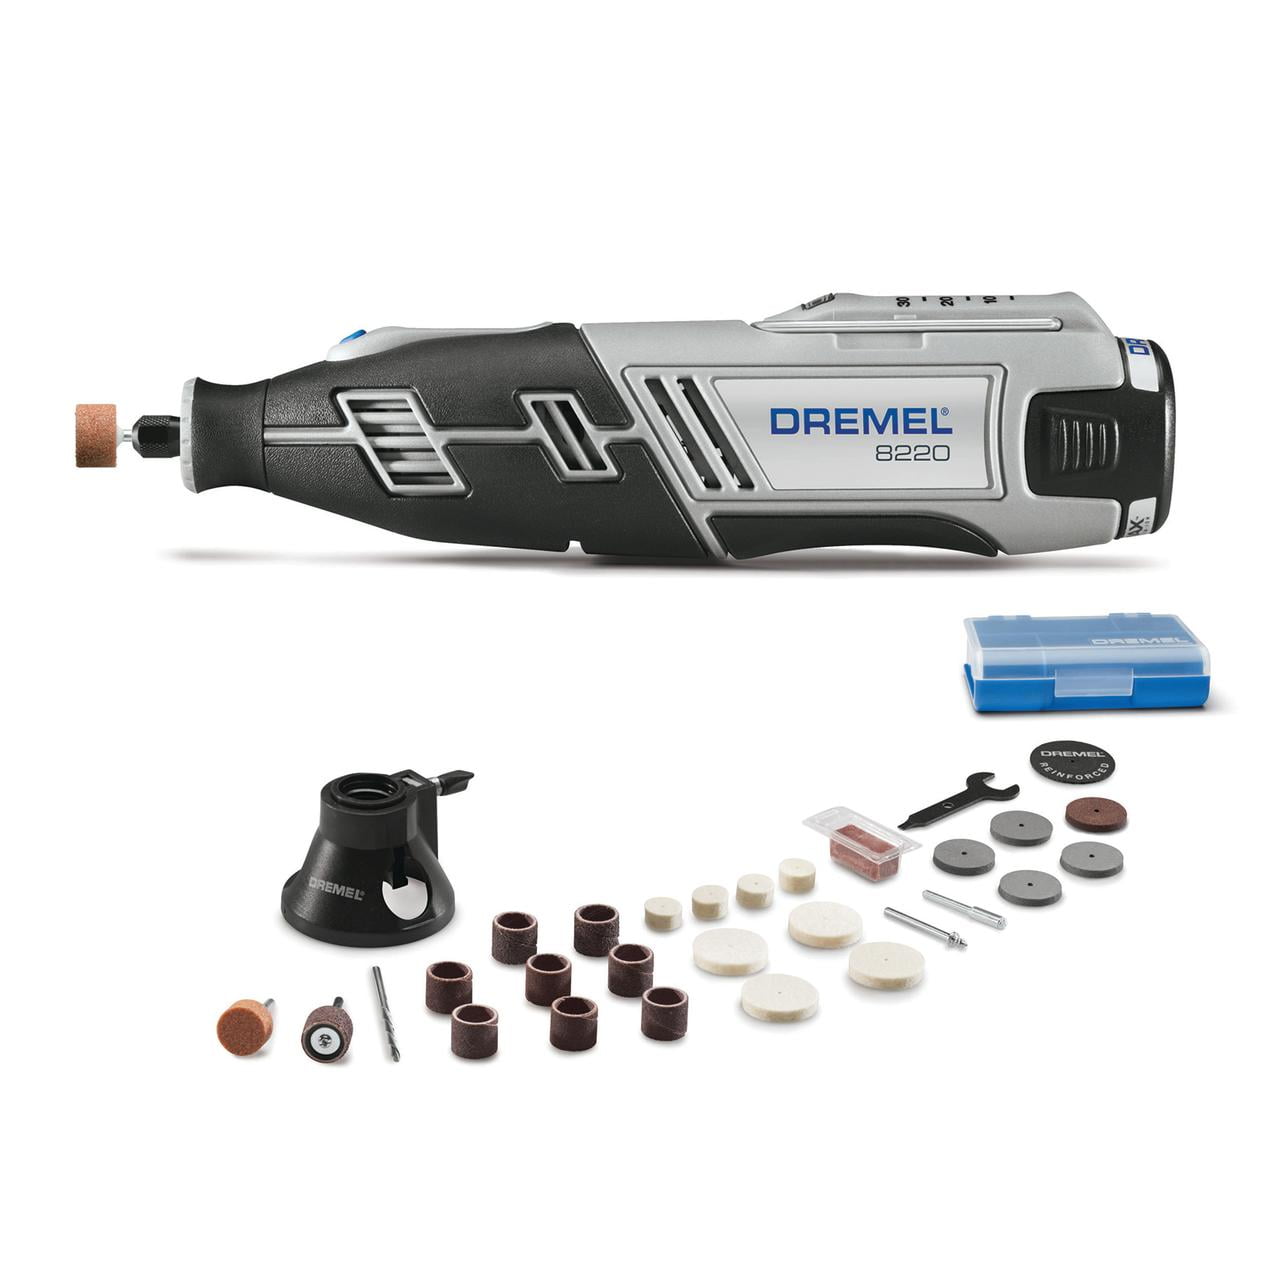 Dremel 8220 1 28 12V Max Lithium Ion Rotary Tool Kit With 1 5 Ah